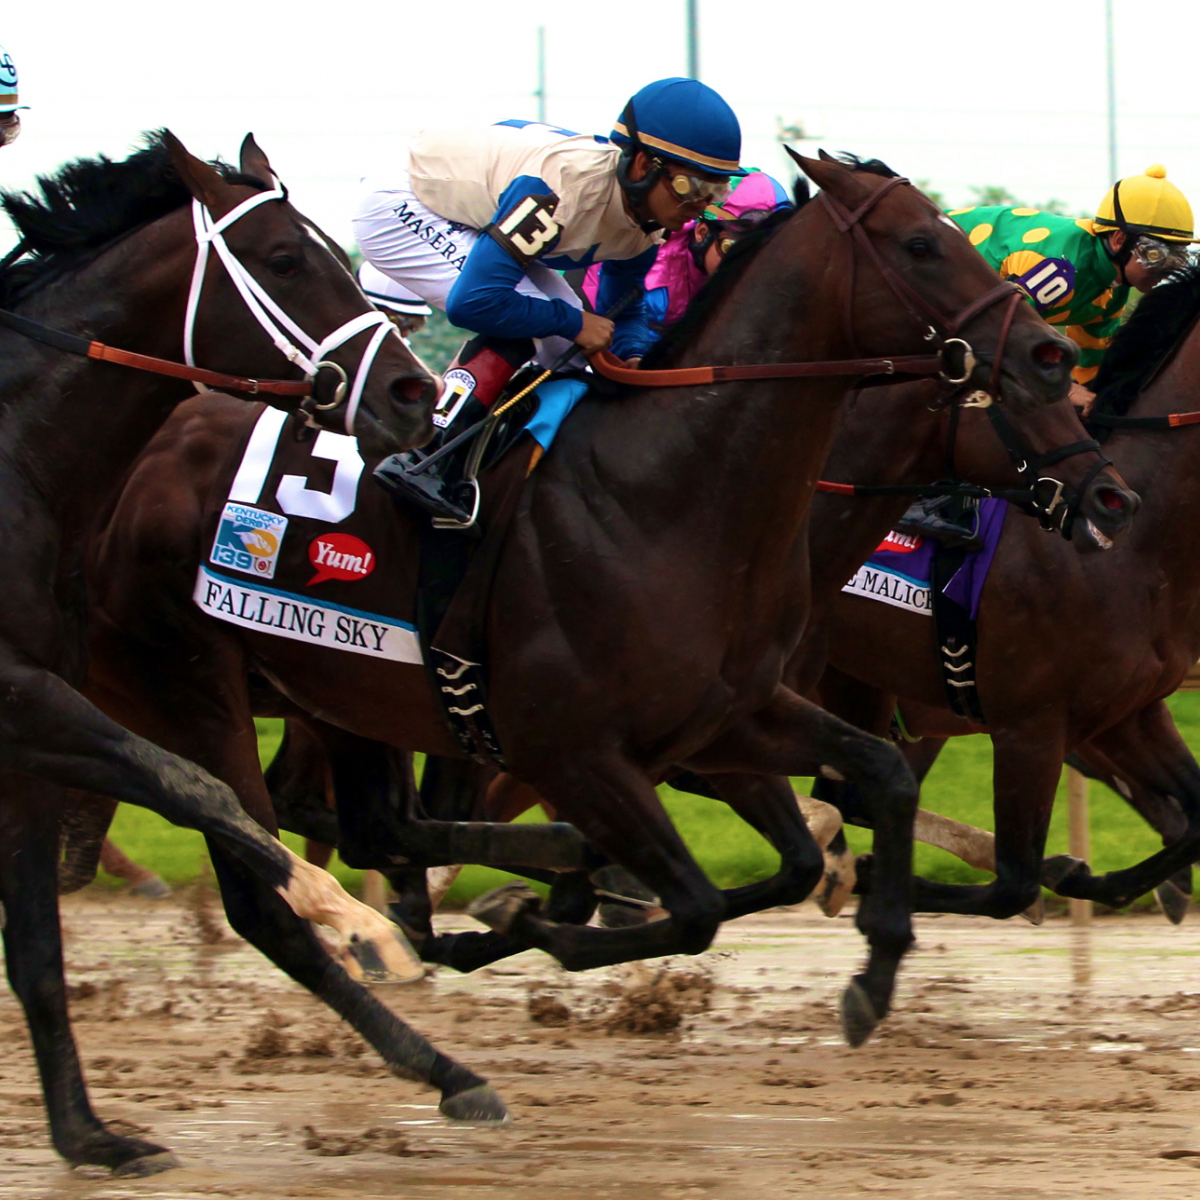 Kentucky Derby Results 2013 Winners and Losers from the Run for the